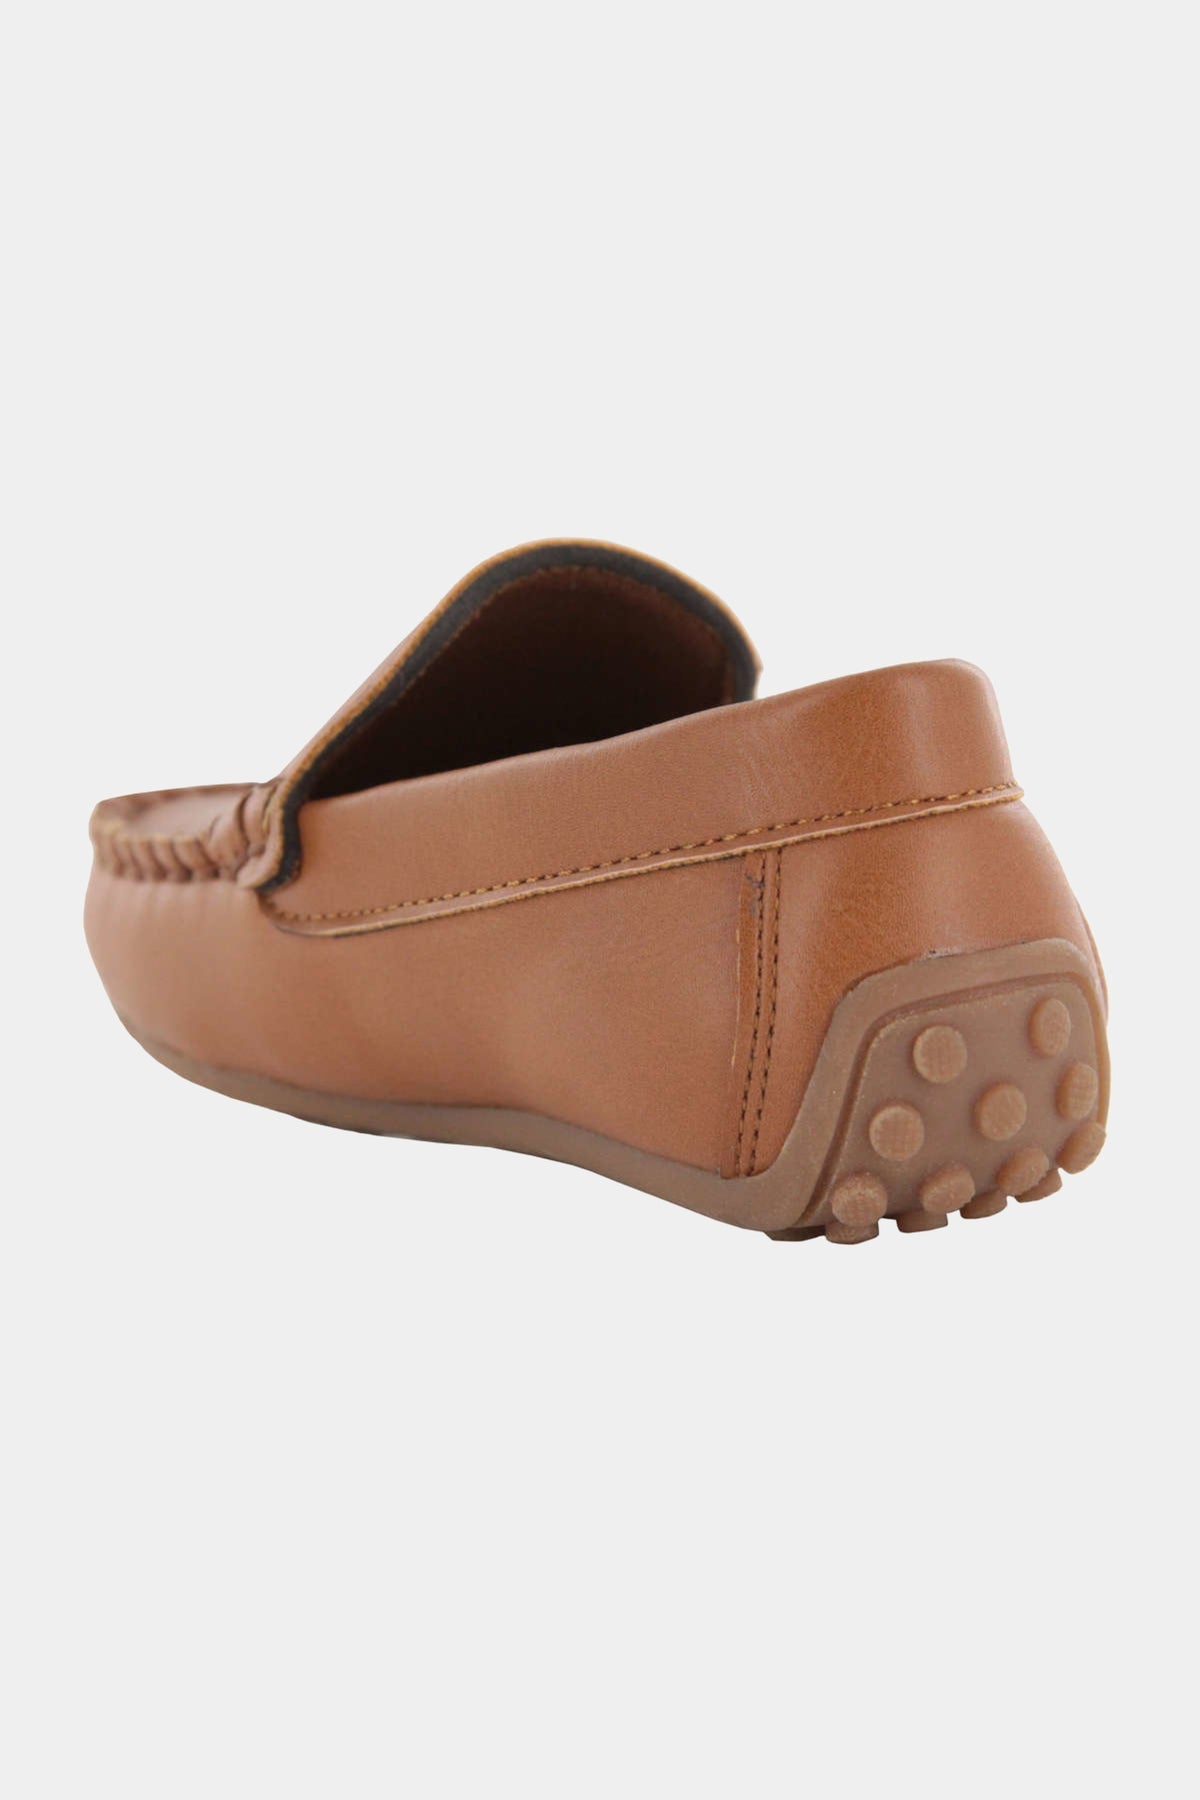 Lil Carsson Loafer - Tan